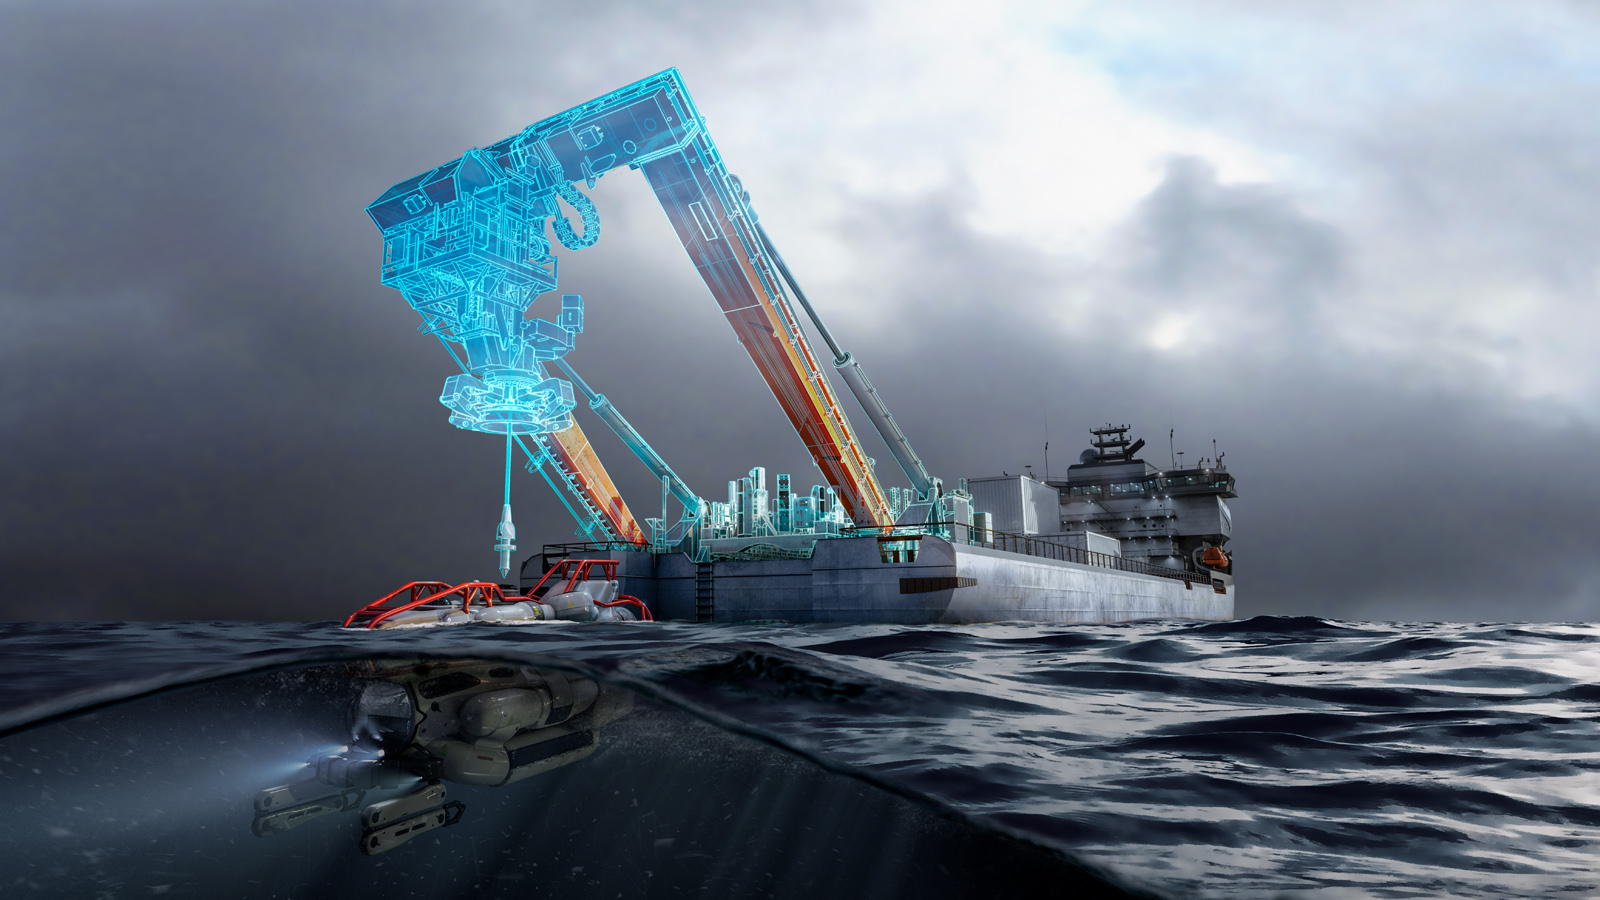 artist impression of a navy vessel with submarine rescue system on board